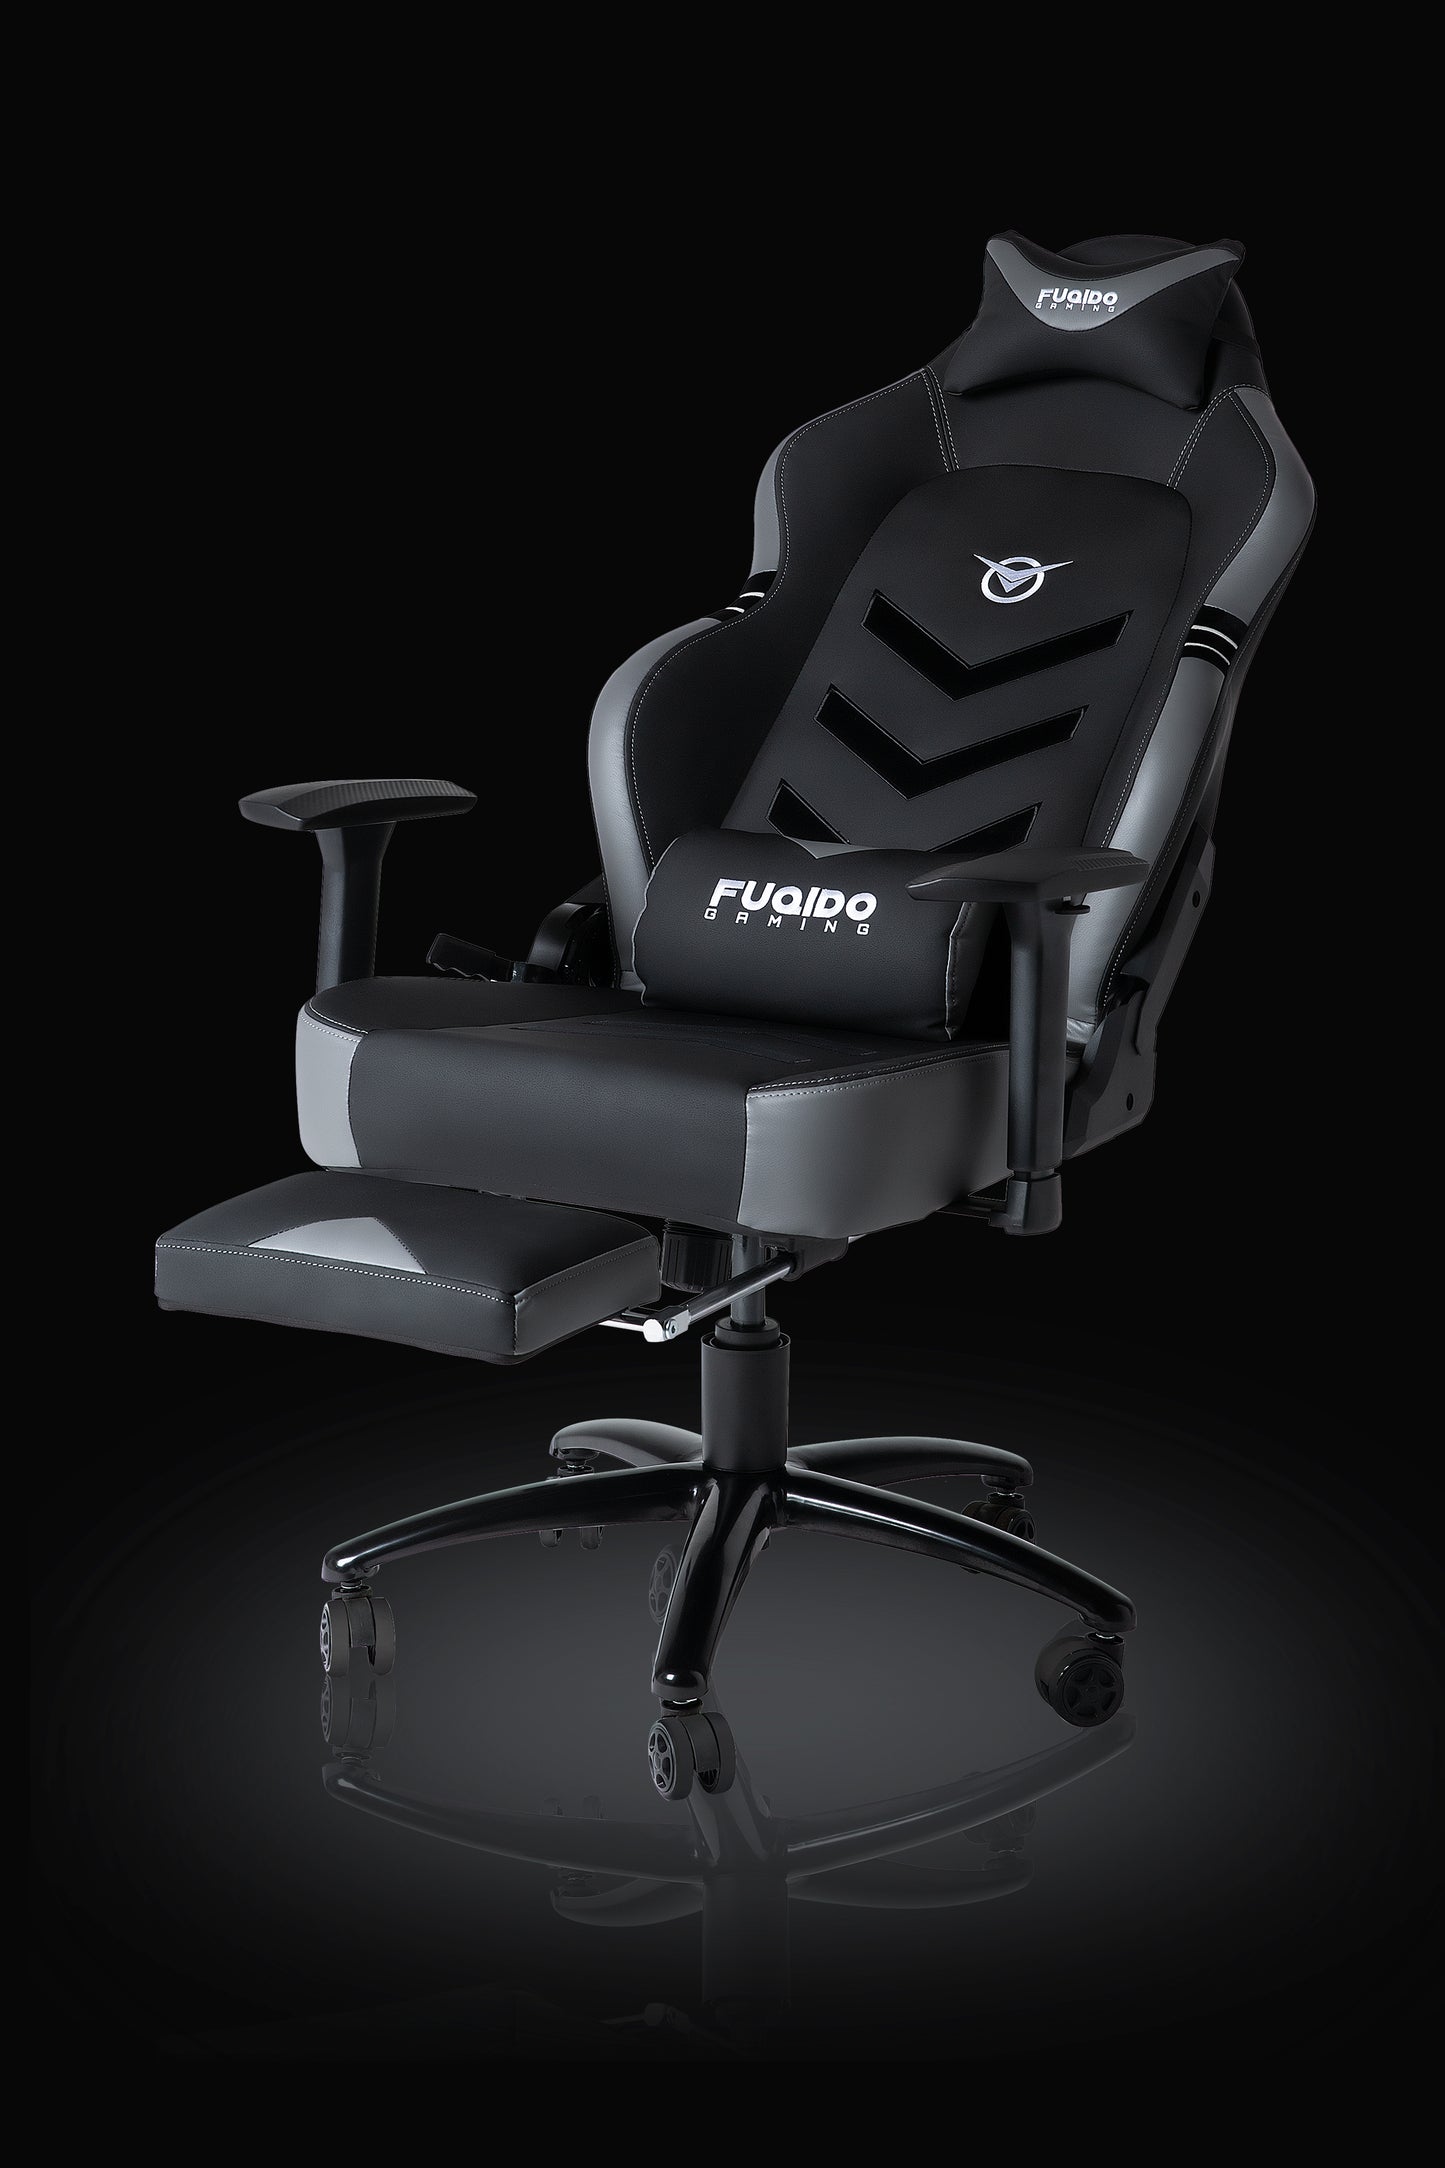 FUQIDO Recling Gaming Chair with Footrest 1325F in Gray #color_gray